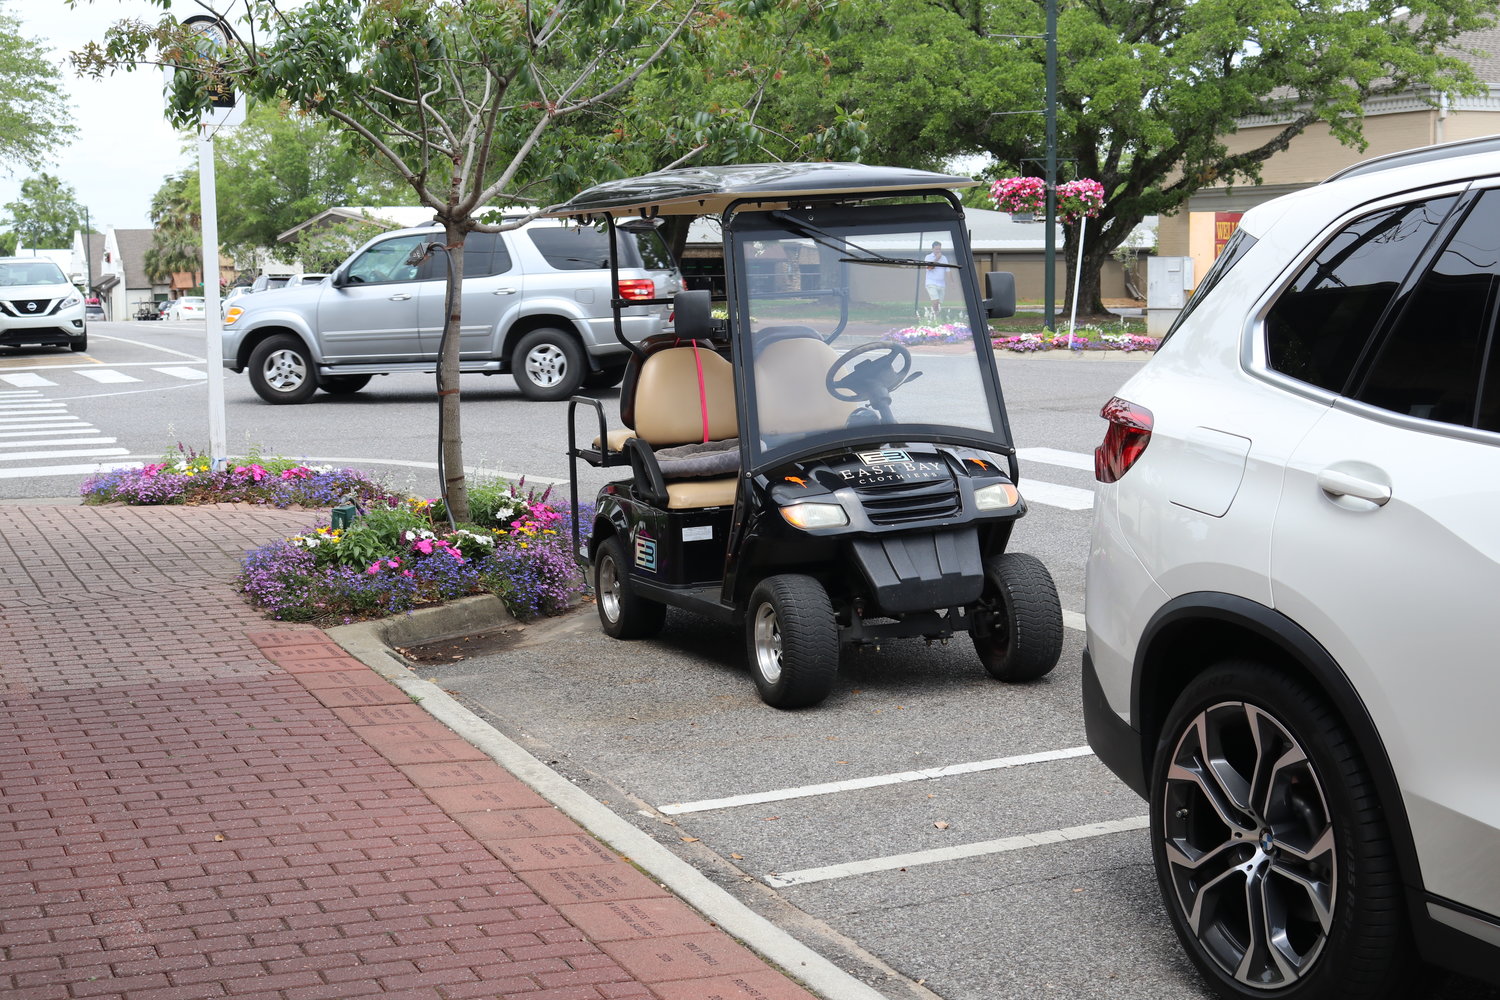 Parking space designation for cars and golf carts was among the items discussed Monday, April 11, by the Fairhope City Council during consideration of a development proposal.